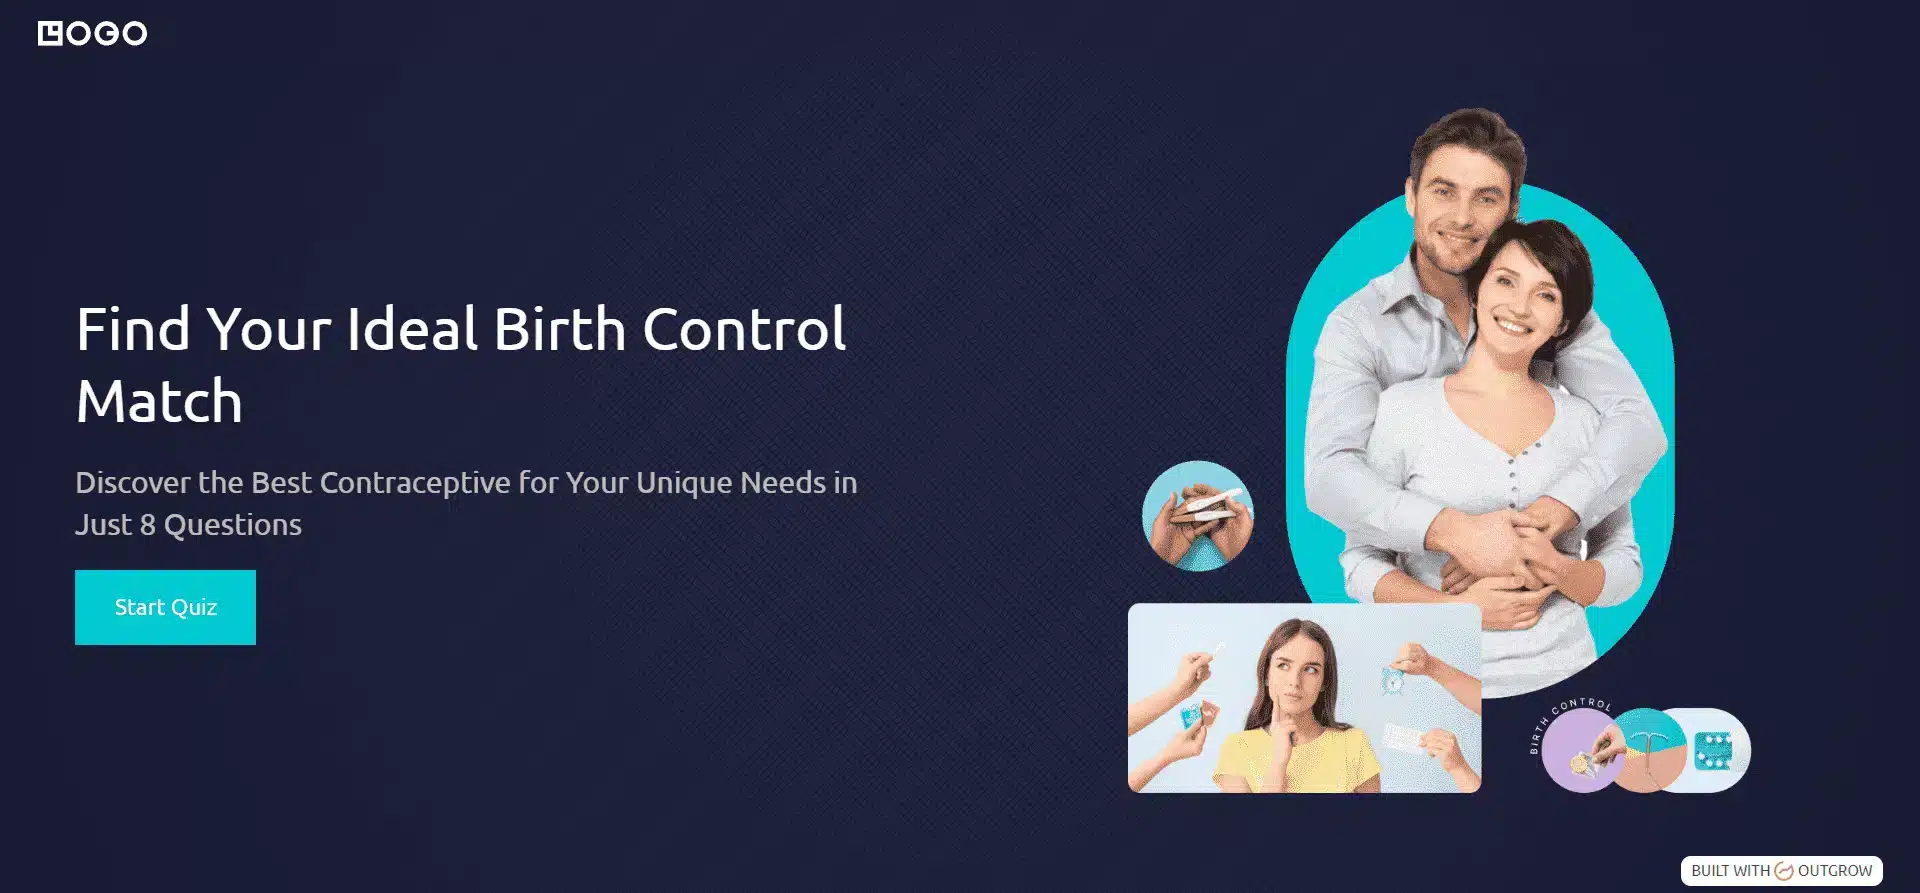 Find Your Ideal Birth Control Match new